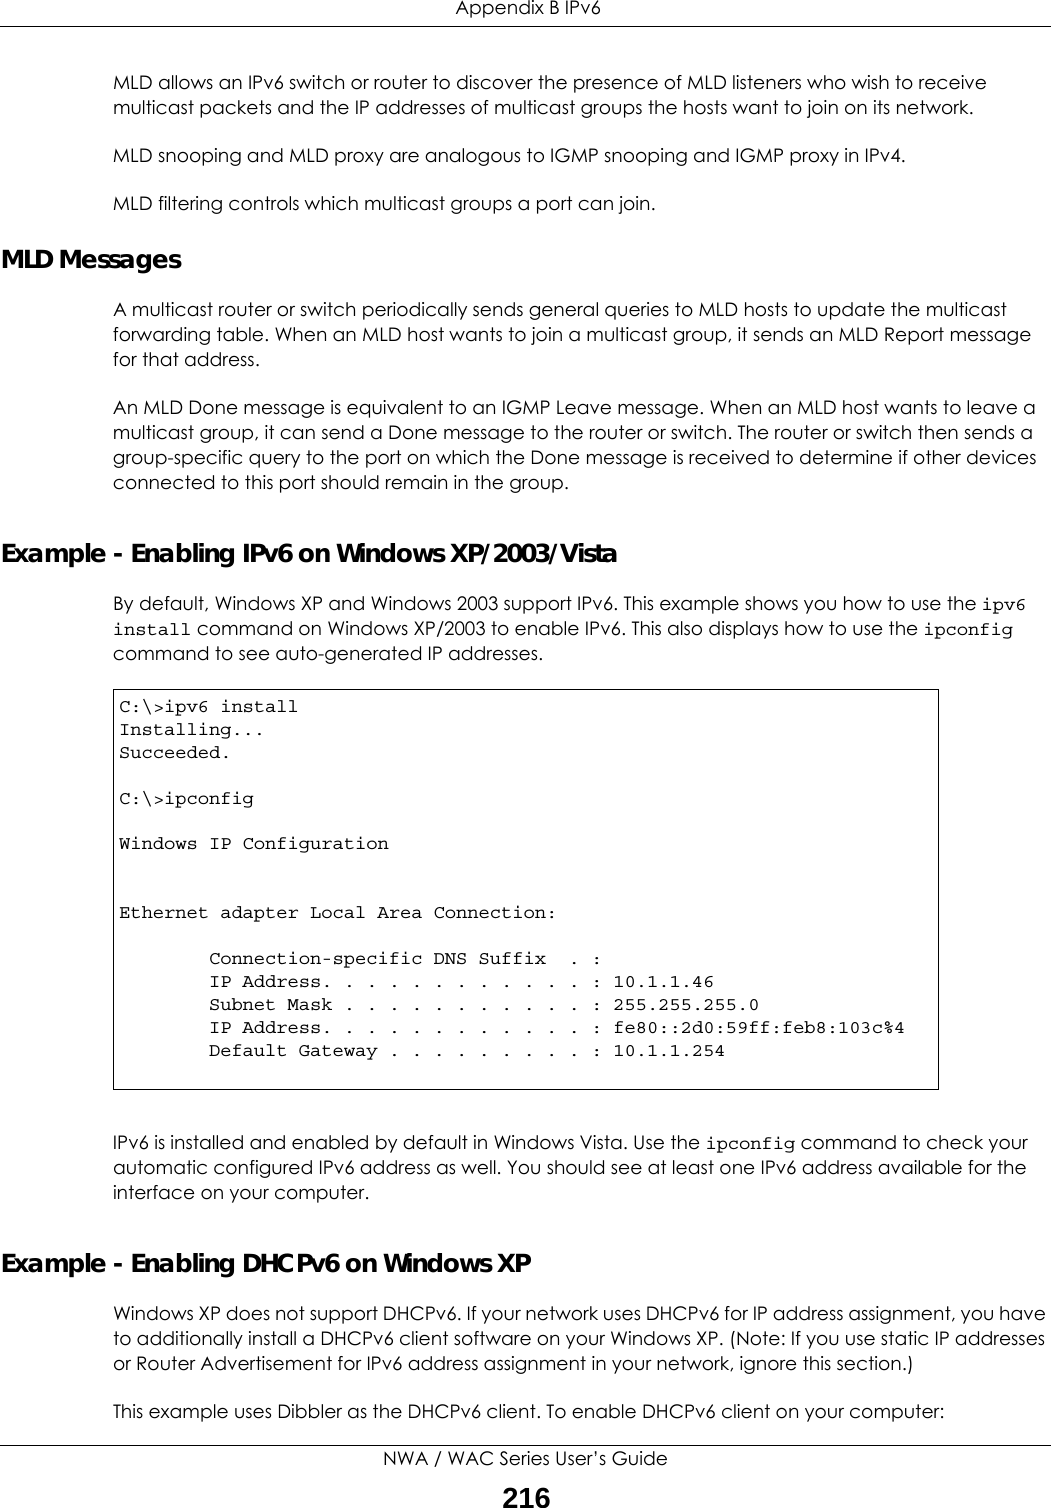  Appendix B IPv6NWA / WAC Series User’s Guide216MLD allows an IPv6 switch or router to discover the presence of MLD listeners who wish to receive multicast packets and the IP addresses of multicast groups the hosts want to join on its network.  MLD snooping and MLD proxy are analogous to IGMP snooping and IGMP proxy in IPv4. MLD filtering controls which multicast groups a port can join.MLD MessagesA multicast router or switch periodically sends general queries to MLD hosts to update the multicast forwarding table. When an MLD host wants to join a multicast group, it sends an MLD Report message for that address.An MLD Done message is equivalent to an IGMP Leave message. When an MLD host wants to leave a multicast group, it can send a Done message to the router or switch. The router or switch then sends a group-specific query to the port on which the Done message is received to determine if other devices connected to this port should remain in the group.Example - Enabling IPv6 on Windows XP/2003/VistaBy default, Windows XP and Windows 2003 support IPv6. This example shows you how to use the ipv6 install command on Windows XP/2003 to enable IPv6. This also displays how to use the ipconfig command to see auto-generated IP addresses.IPv6 is installed and enabled by default in Windows Vista. Use the ipconfig command to check your automatic configured IPv6 address as well. You should see at least one IPv6 address available for the interface on your computer.Example - Enabling DHCPv6 on Windows XPWindows XP does not support DHCPv6. If your network uses DHCPv6 for IP address assignment, you have to additionally install a DHCPv6 client software on your Windows XP. (Note: If you use static IP addresses or Router Advertisement for IPv6 address assignment in your network, ignore this section.)This example uses Dibbler as the DHCPv6 client. To enable DHCPv6 client on your computer:C:\&gt;ipv6 installInstalling...Succeeded.C:\&gt;ipconfigWindows IP ConfigurationEthernet adapter Local Area Connection:        Connection-specific DNS Suffix  . :         IP Address. . . . . . . . . . . . : 10.1.1.46        Subnet Mask . . . . . . . . . . . : 255.255.255.0        IP Address. . . . . . . . . . . . : fe80::2d0:59ff:feb8:103c%4        Default Gateway . . . . . . . . . : 10.1.1.254